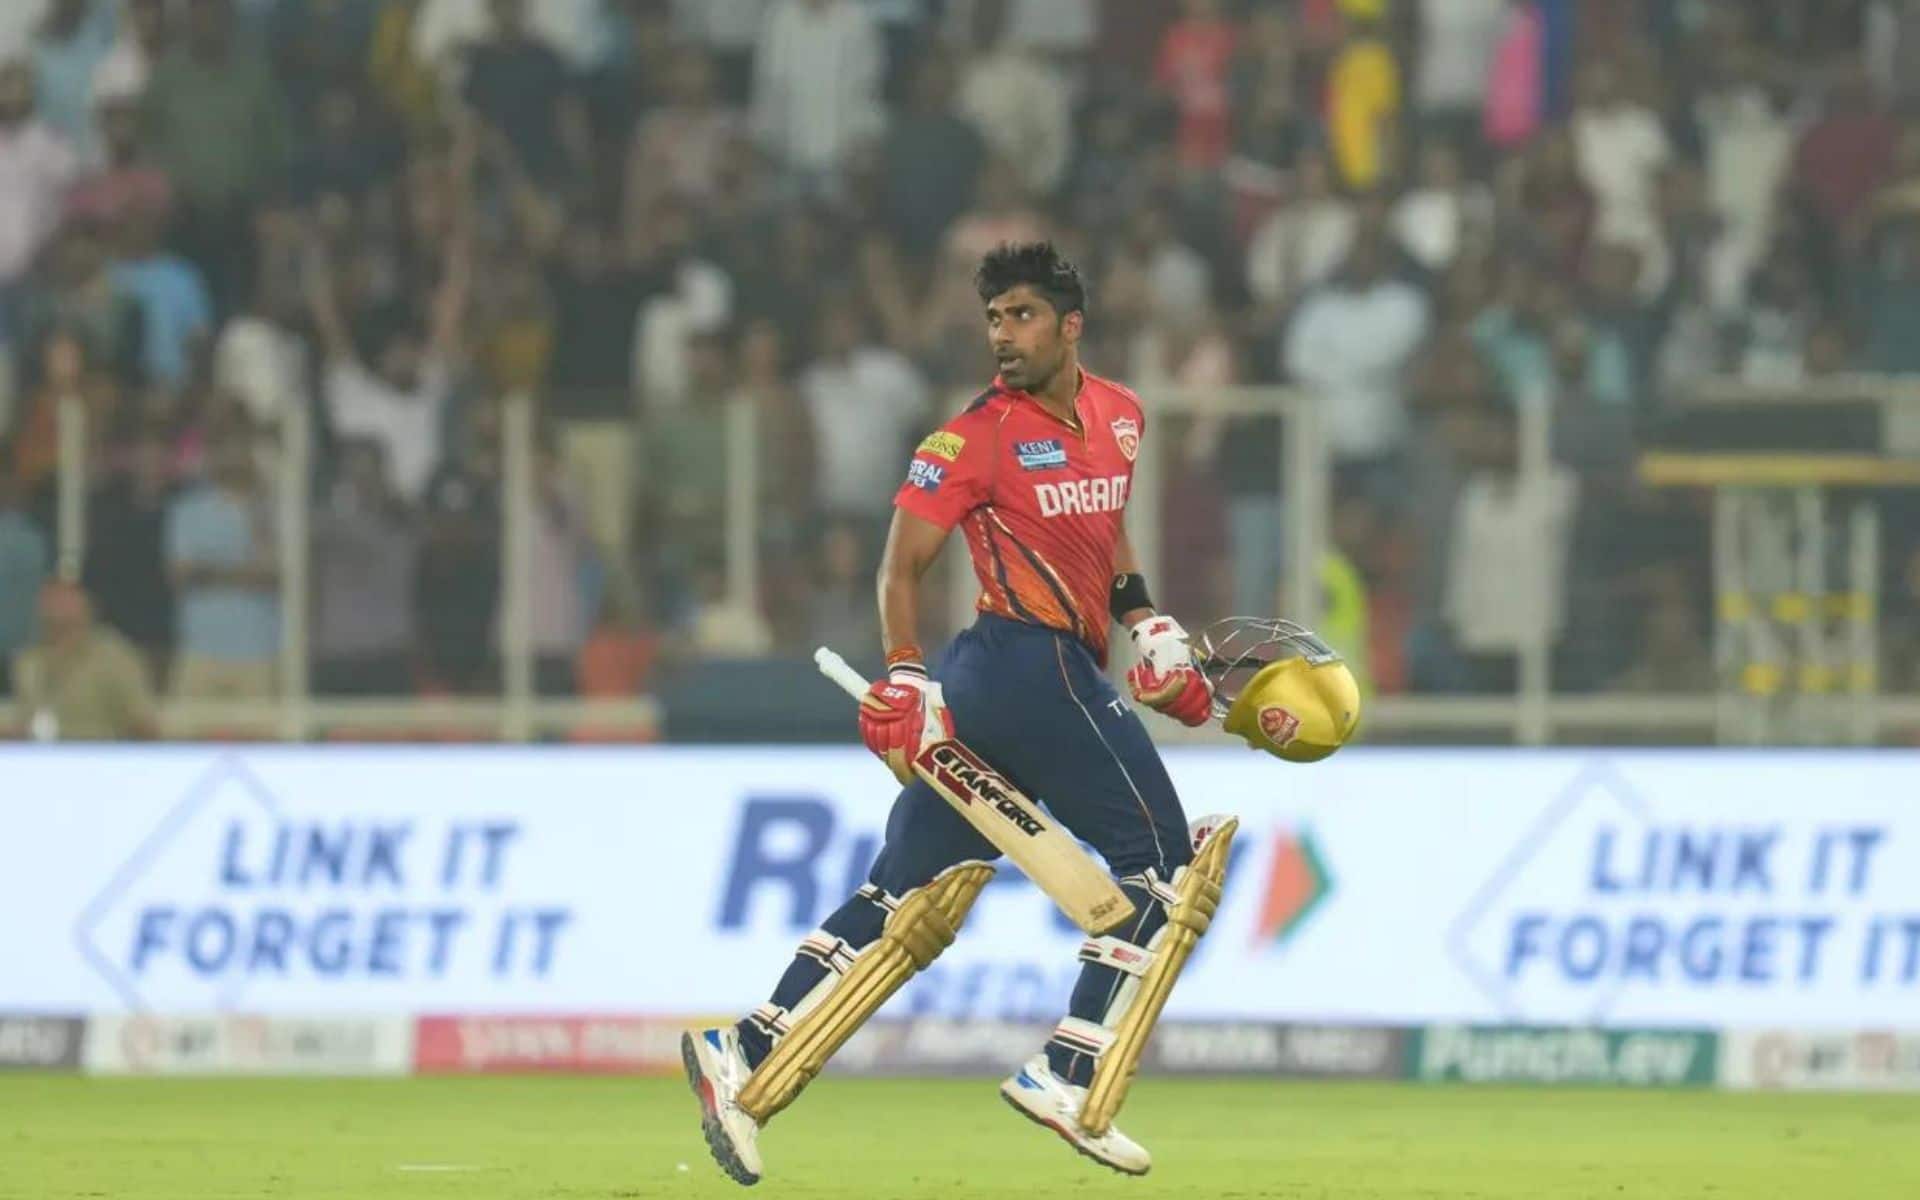 Shashank Singh played a wonderful knock in the last meeting of these two teams [iplt20.com]